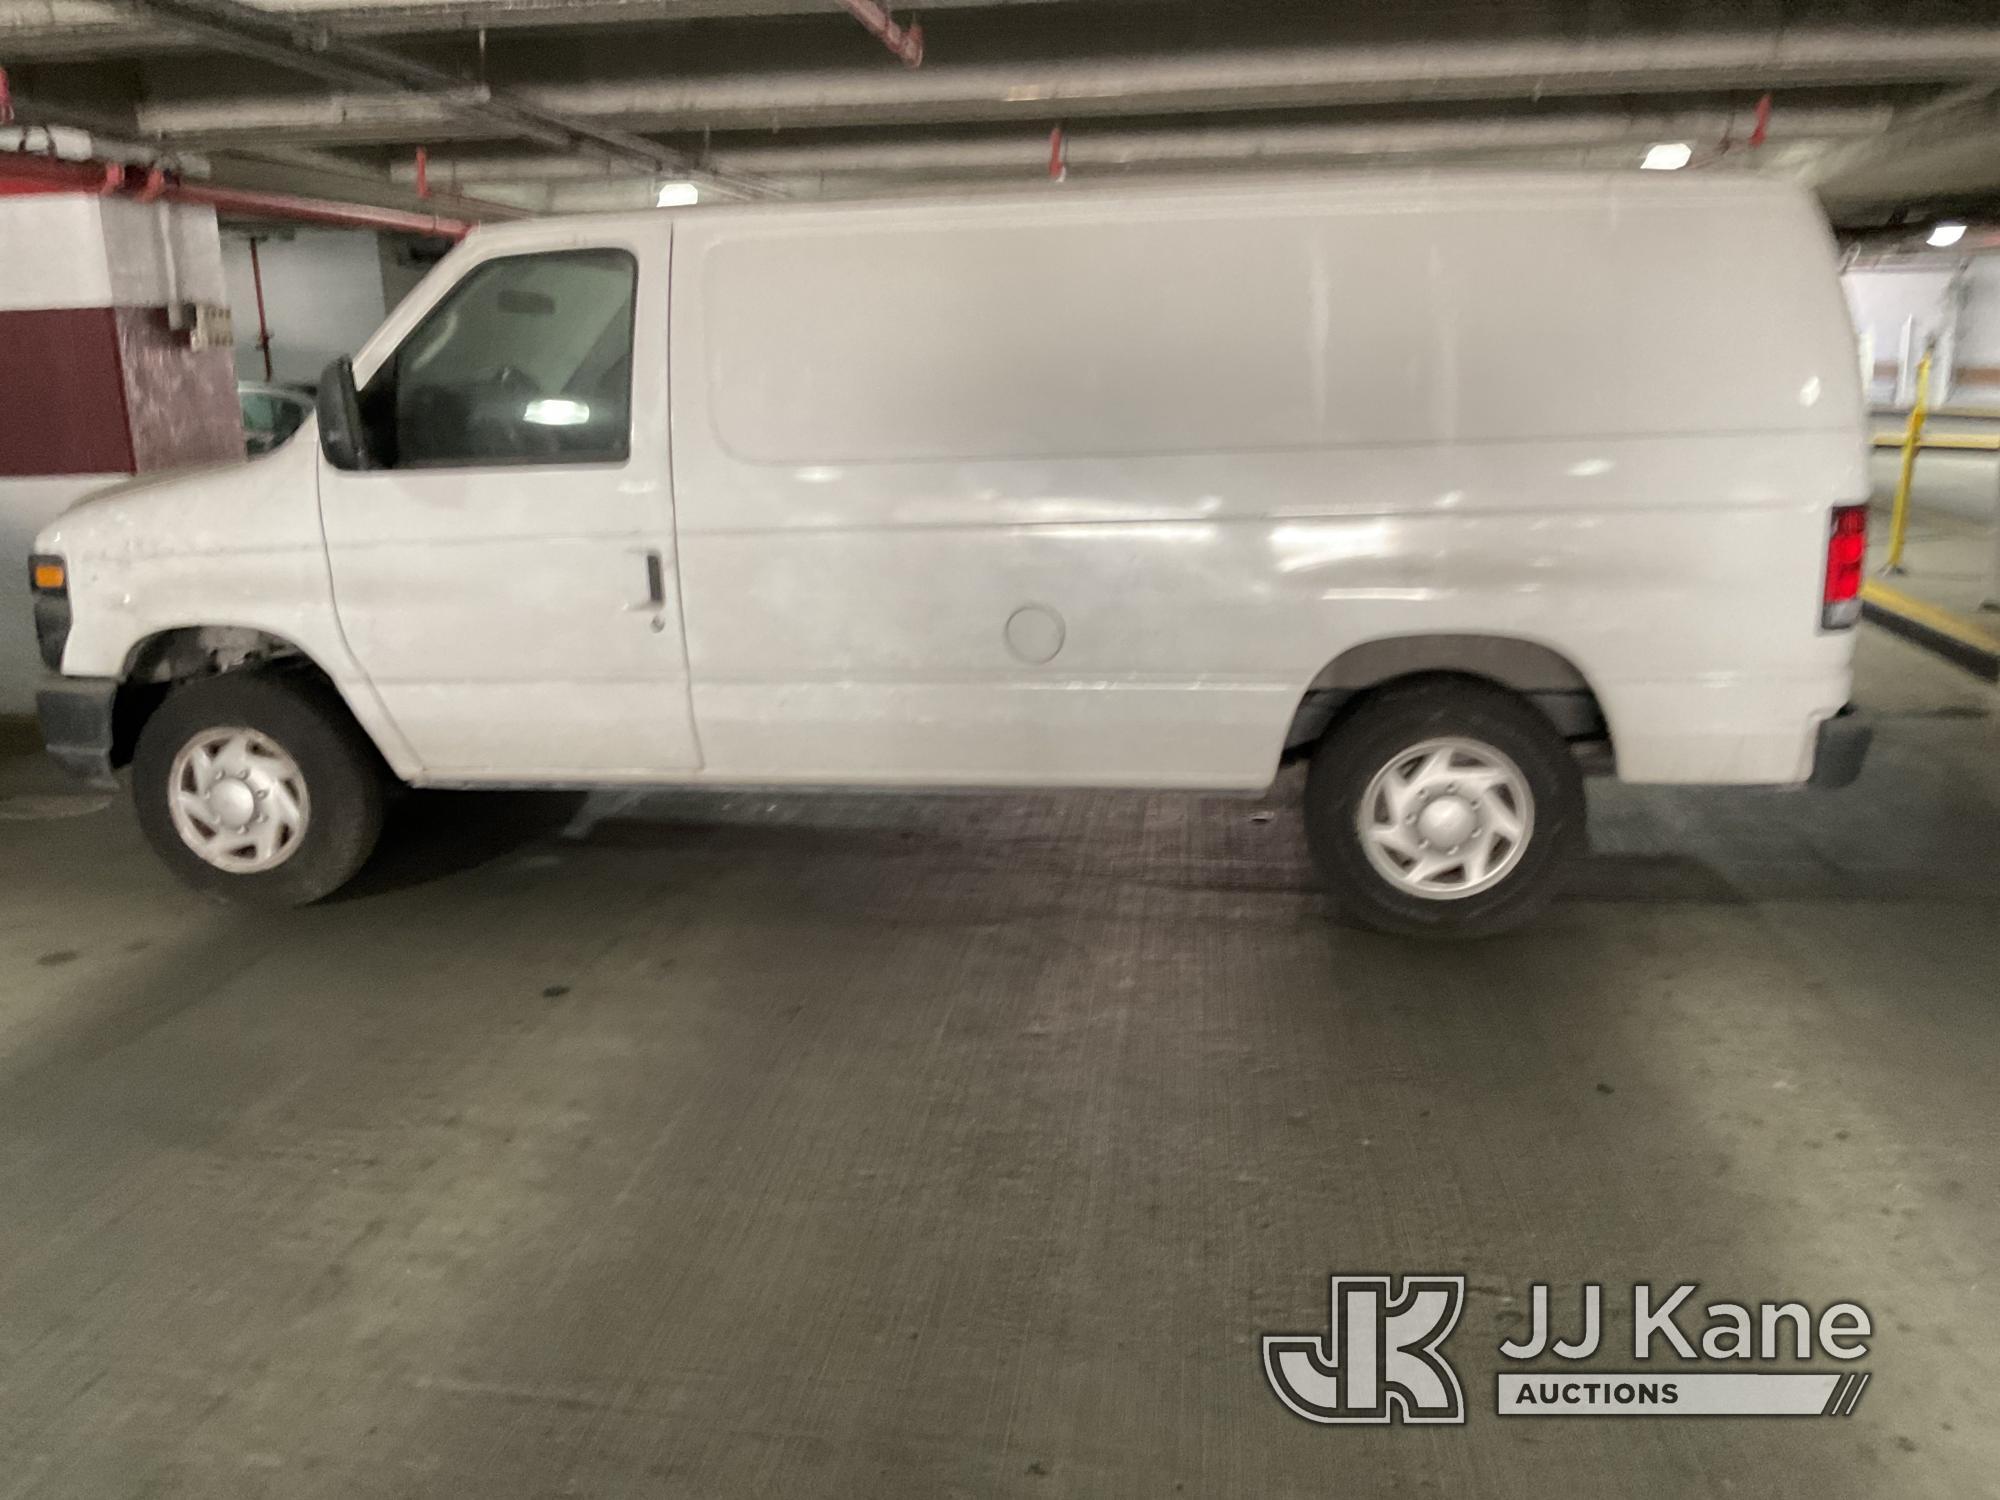 (Houston, TX) 2012 Ford E150 Cargo Van Runs & Moves) (Jump to Start) (Unit Will Not Stay Running Due